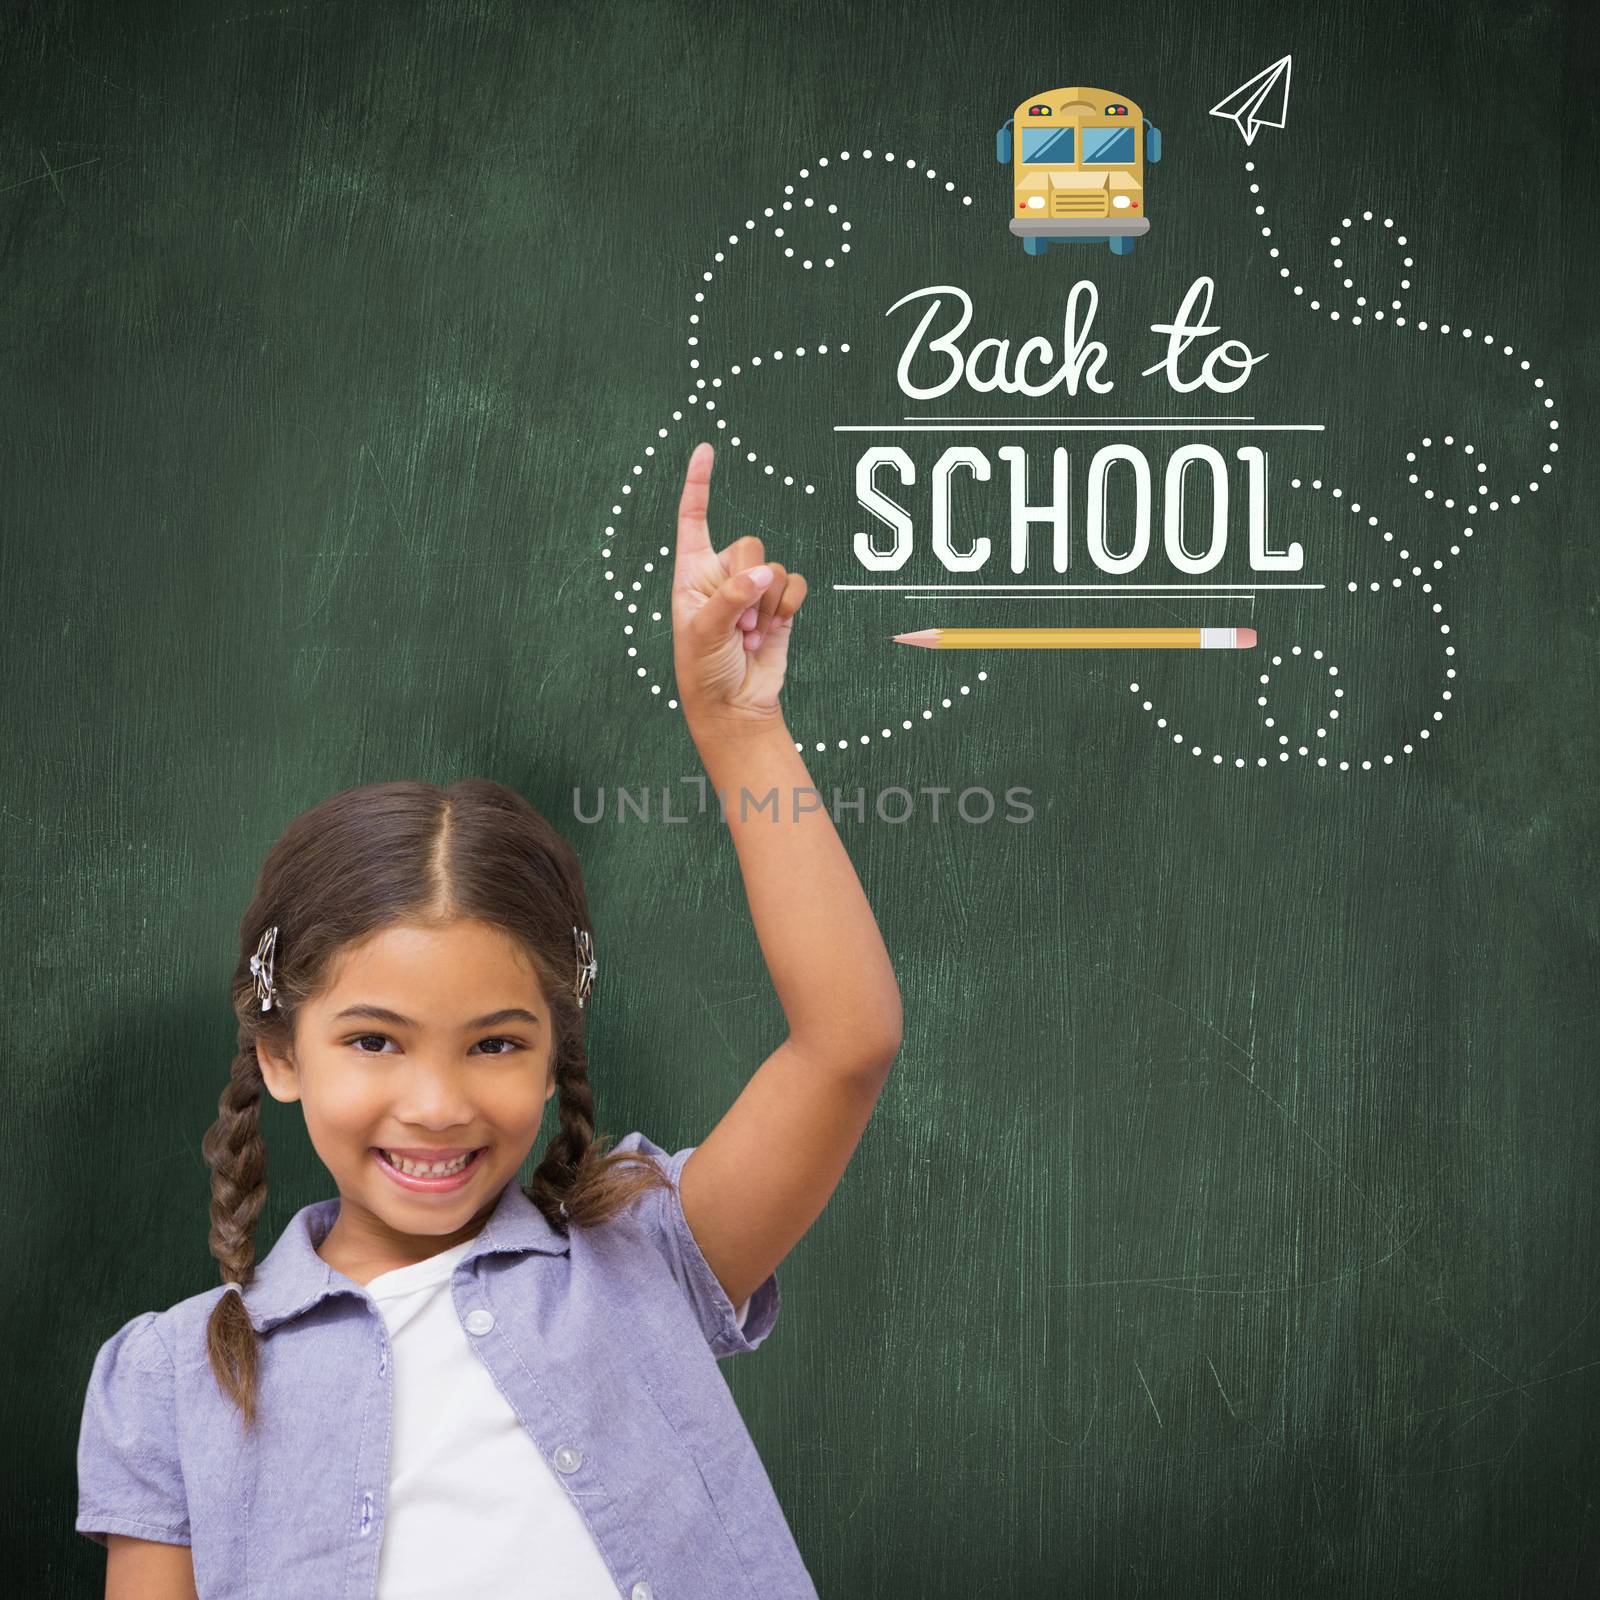 Happy pupil with arm raised against green chalkboard